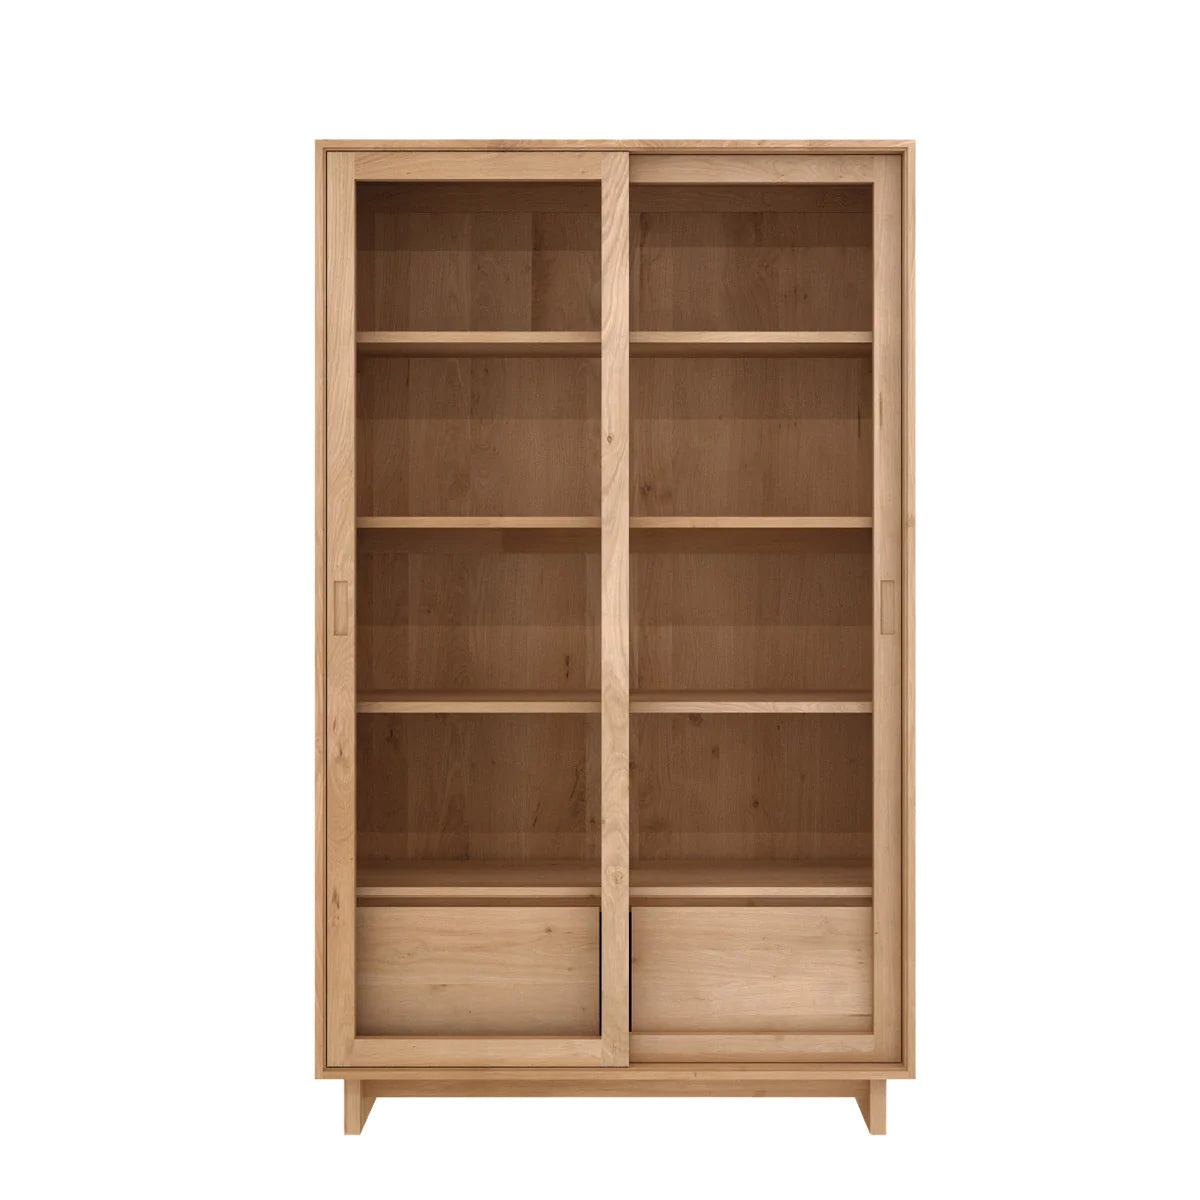 Ethnicraft Oak Wave Storage Display Cabinet available from Make Your House A Home, Bendigo, Victoria, Australia